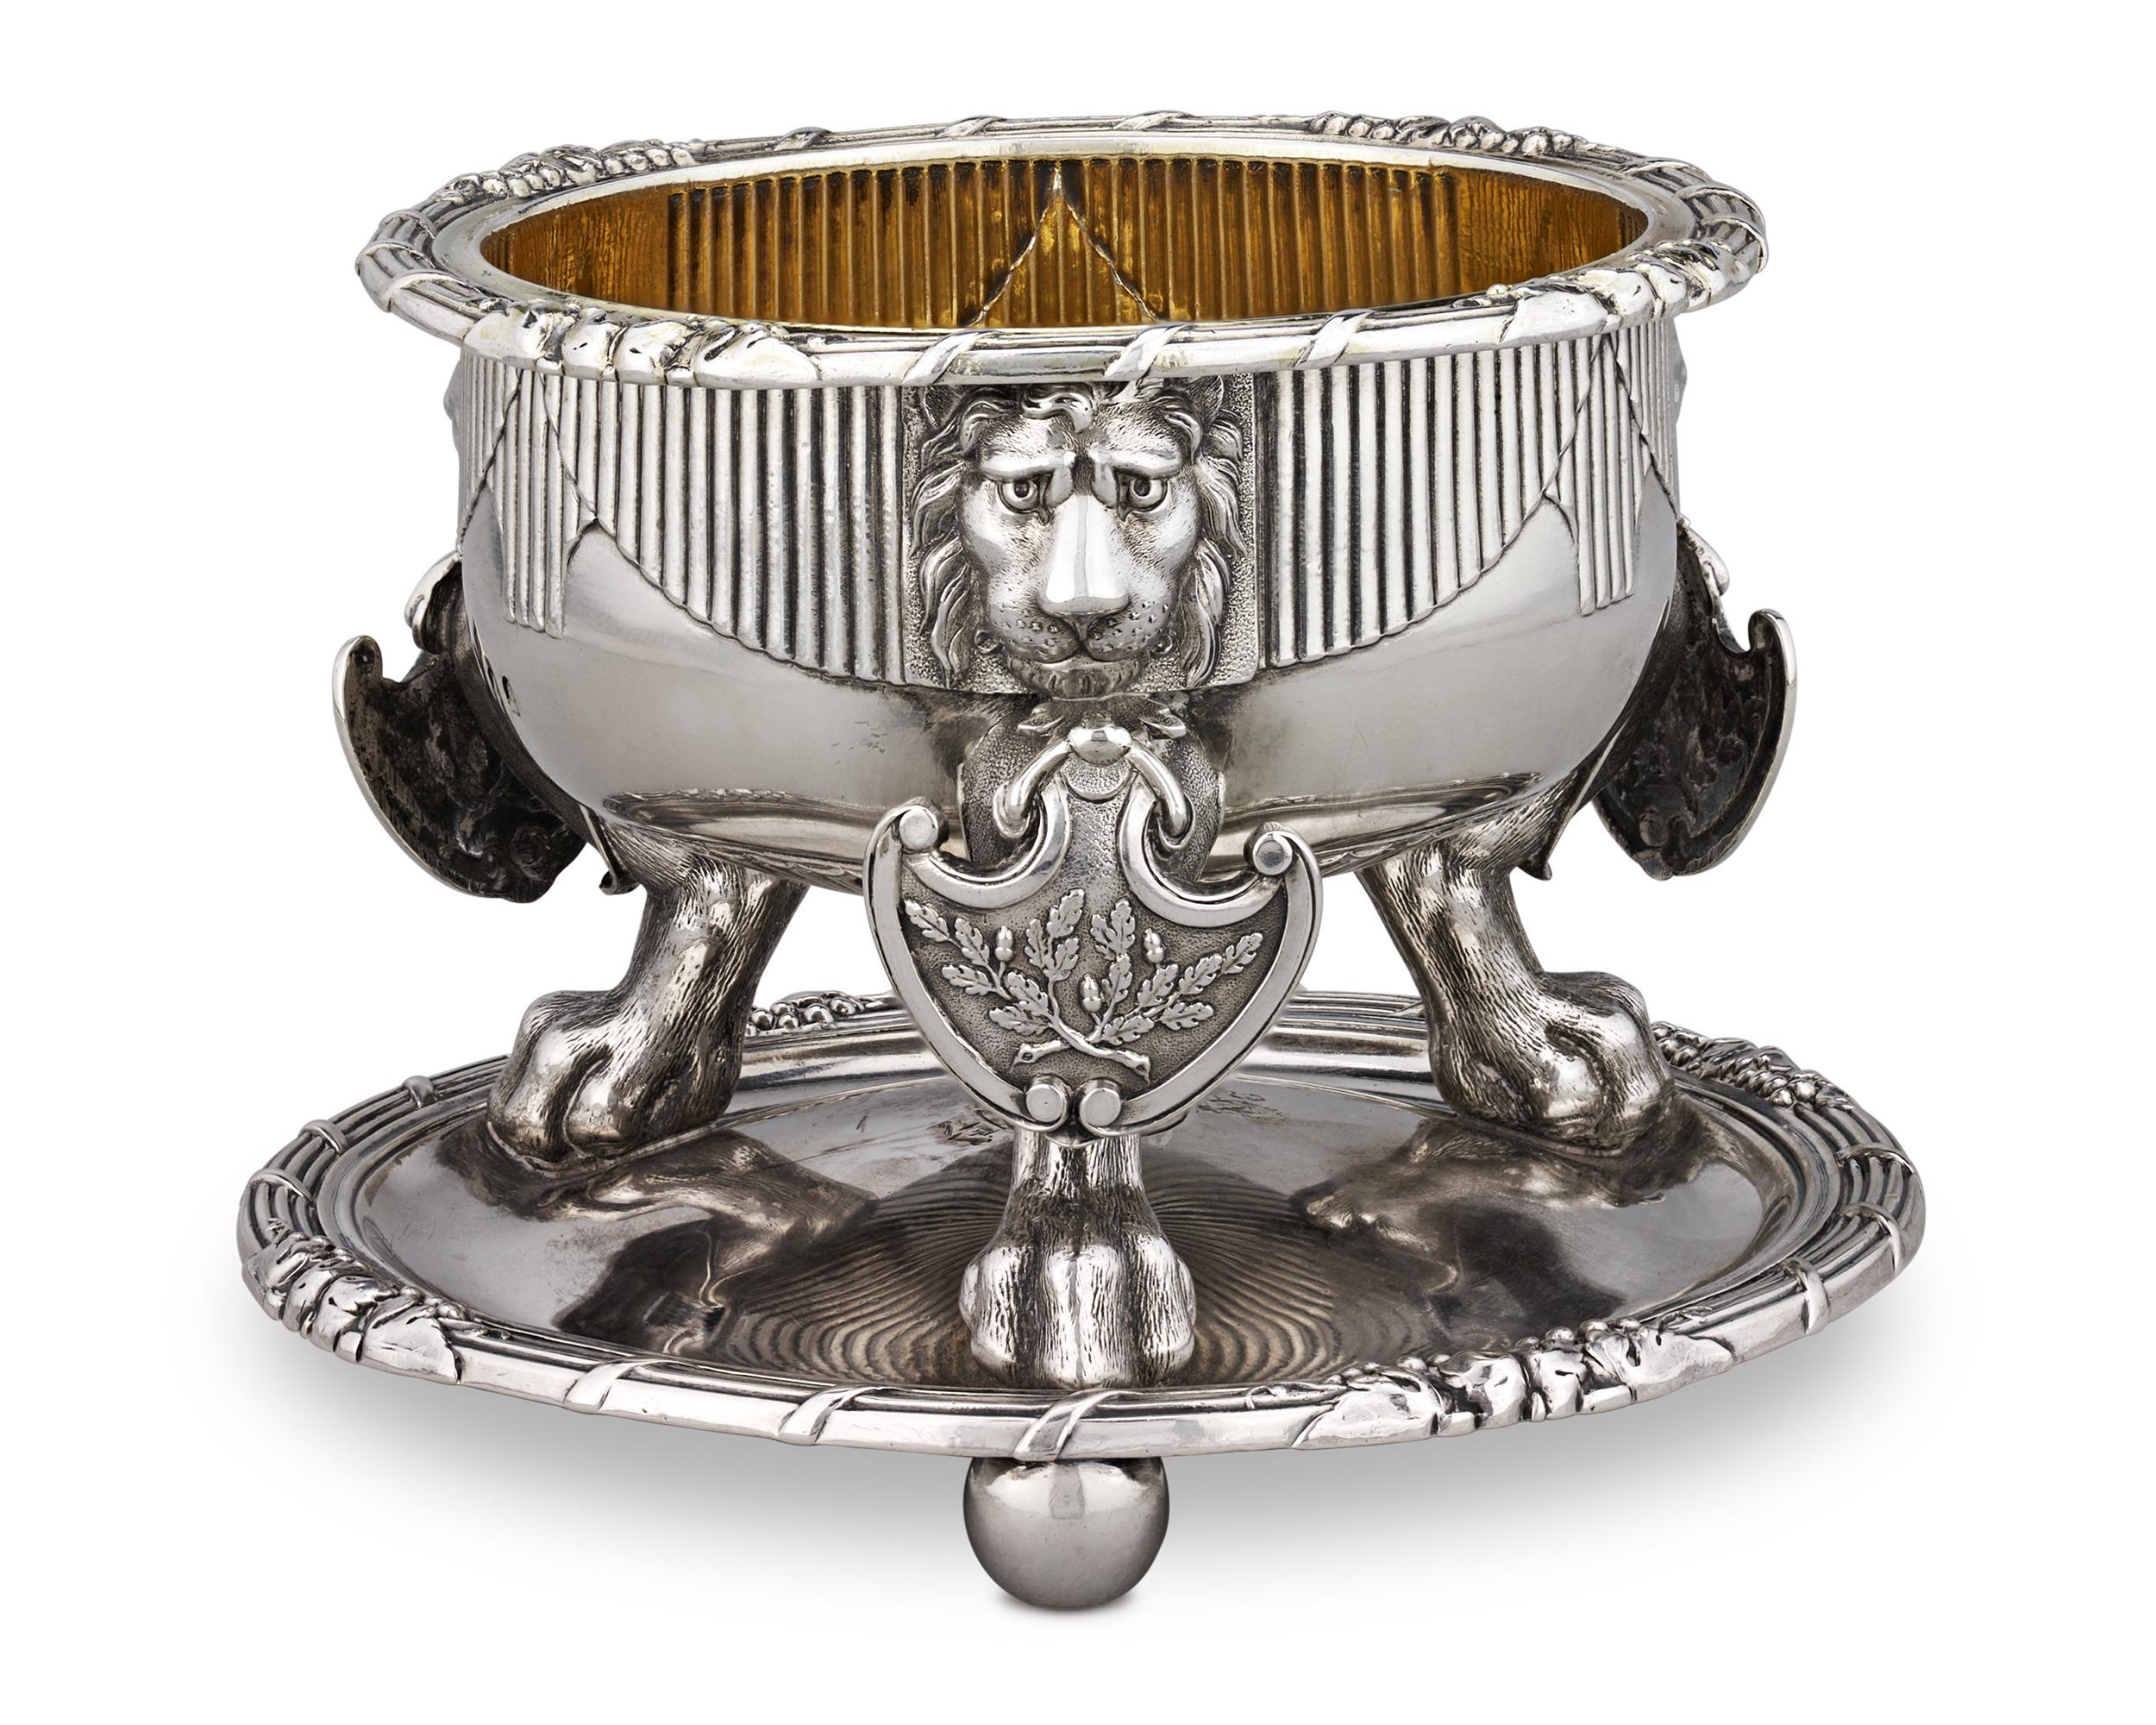 This exquisite George III silver salt and spice cellar by Digby Scott & Benjamin Smith was an important royal gift during a pivotal diplomatic visit when Sir George Henry Rose first traveled to Prussia to establish relations with the new state. The